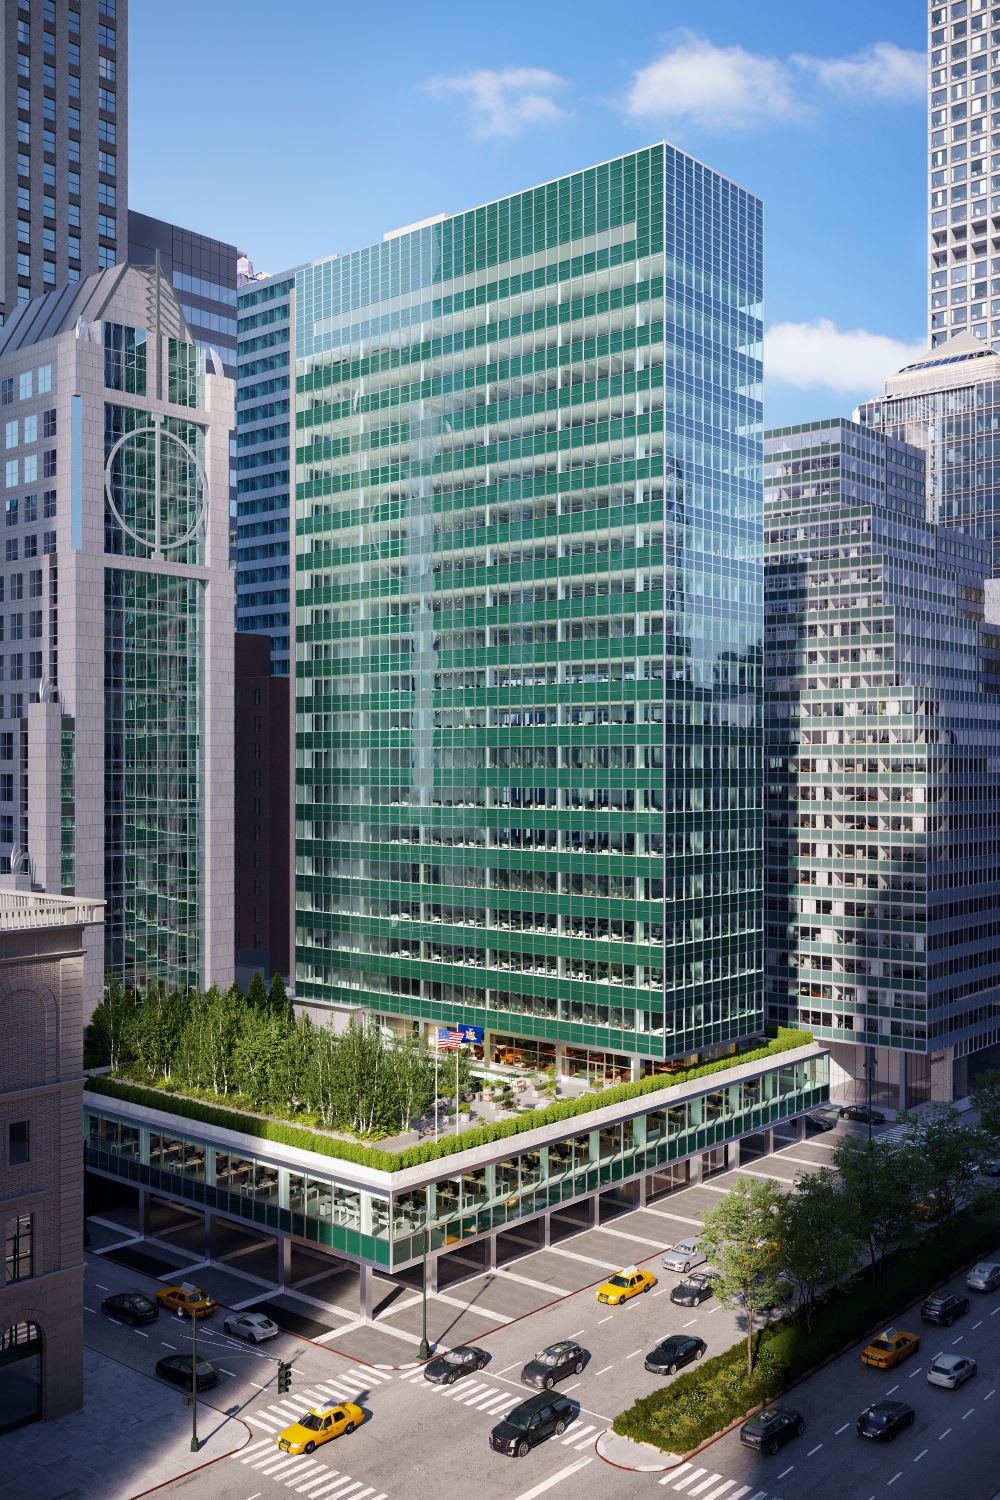 Rendering of the new Lever House terrace, amenity deck and office volume - Courtesy of Brookfield Properties